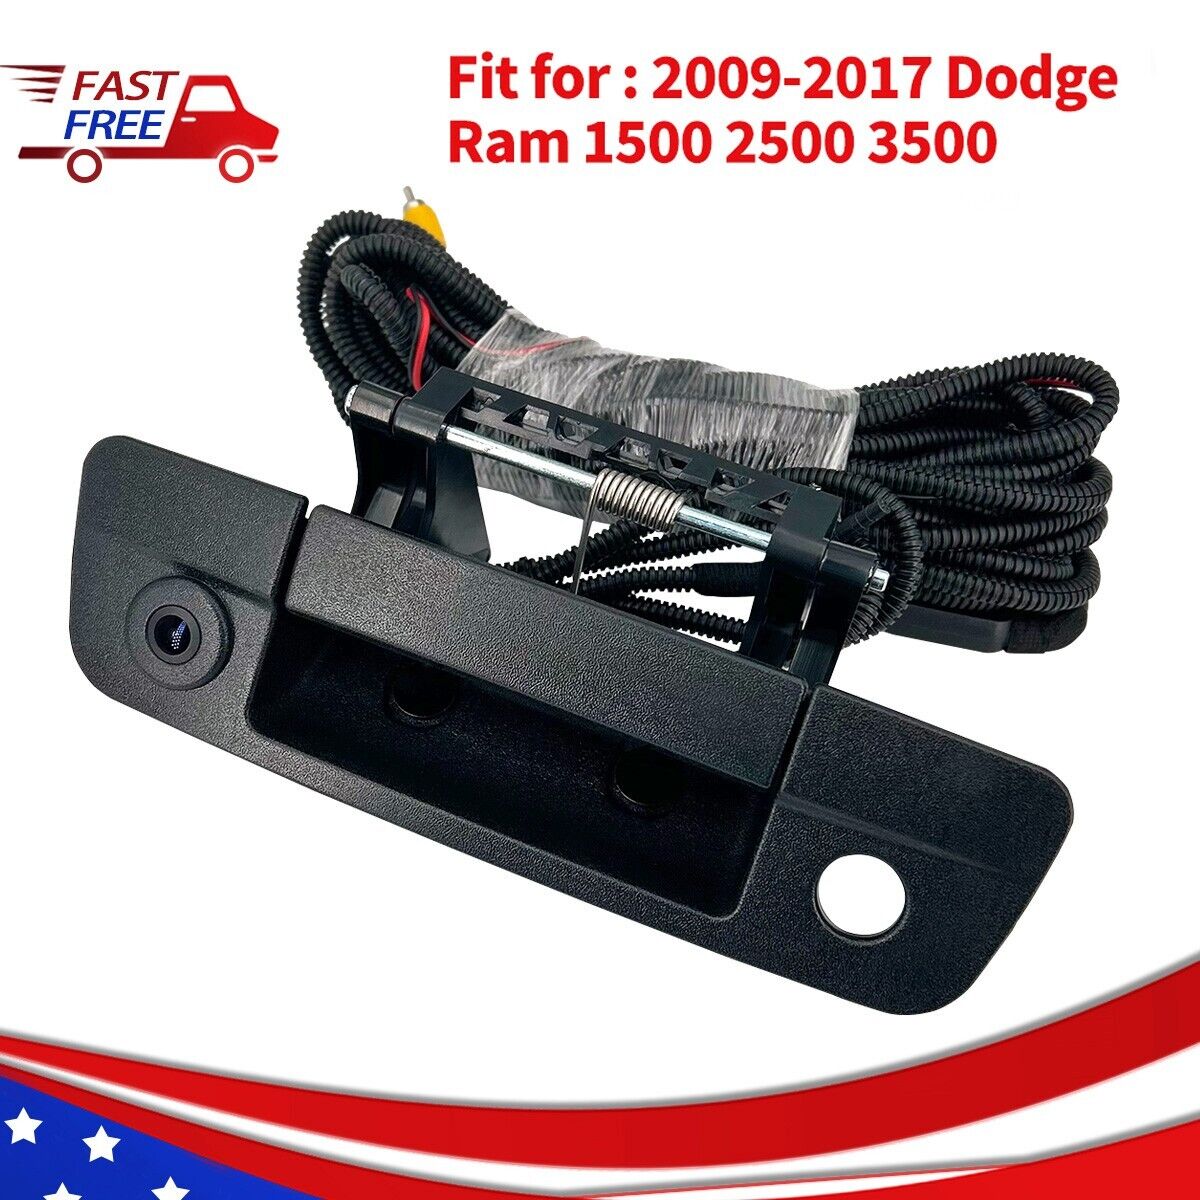 Tailgate Handle rear view  Backup Reverse Camera For 2009-17 Dodge Ram 1500 2500